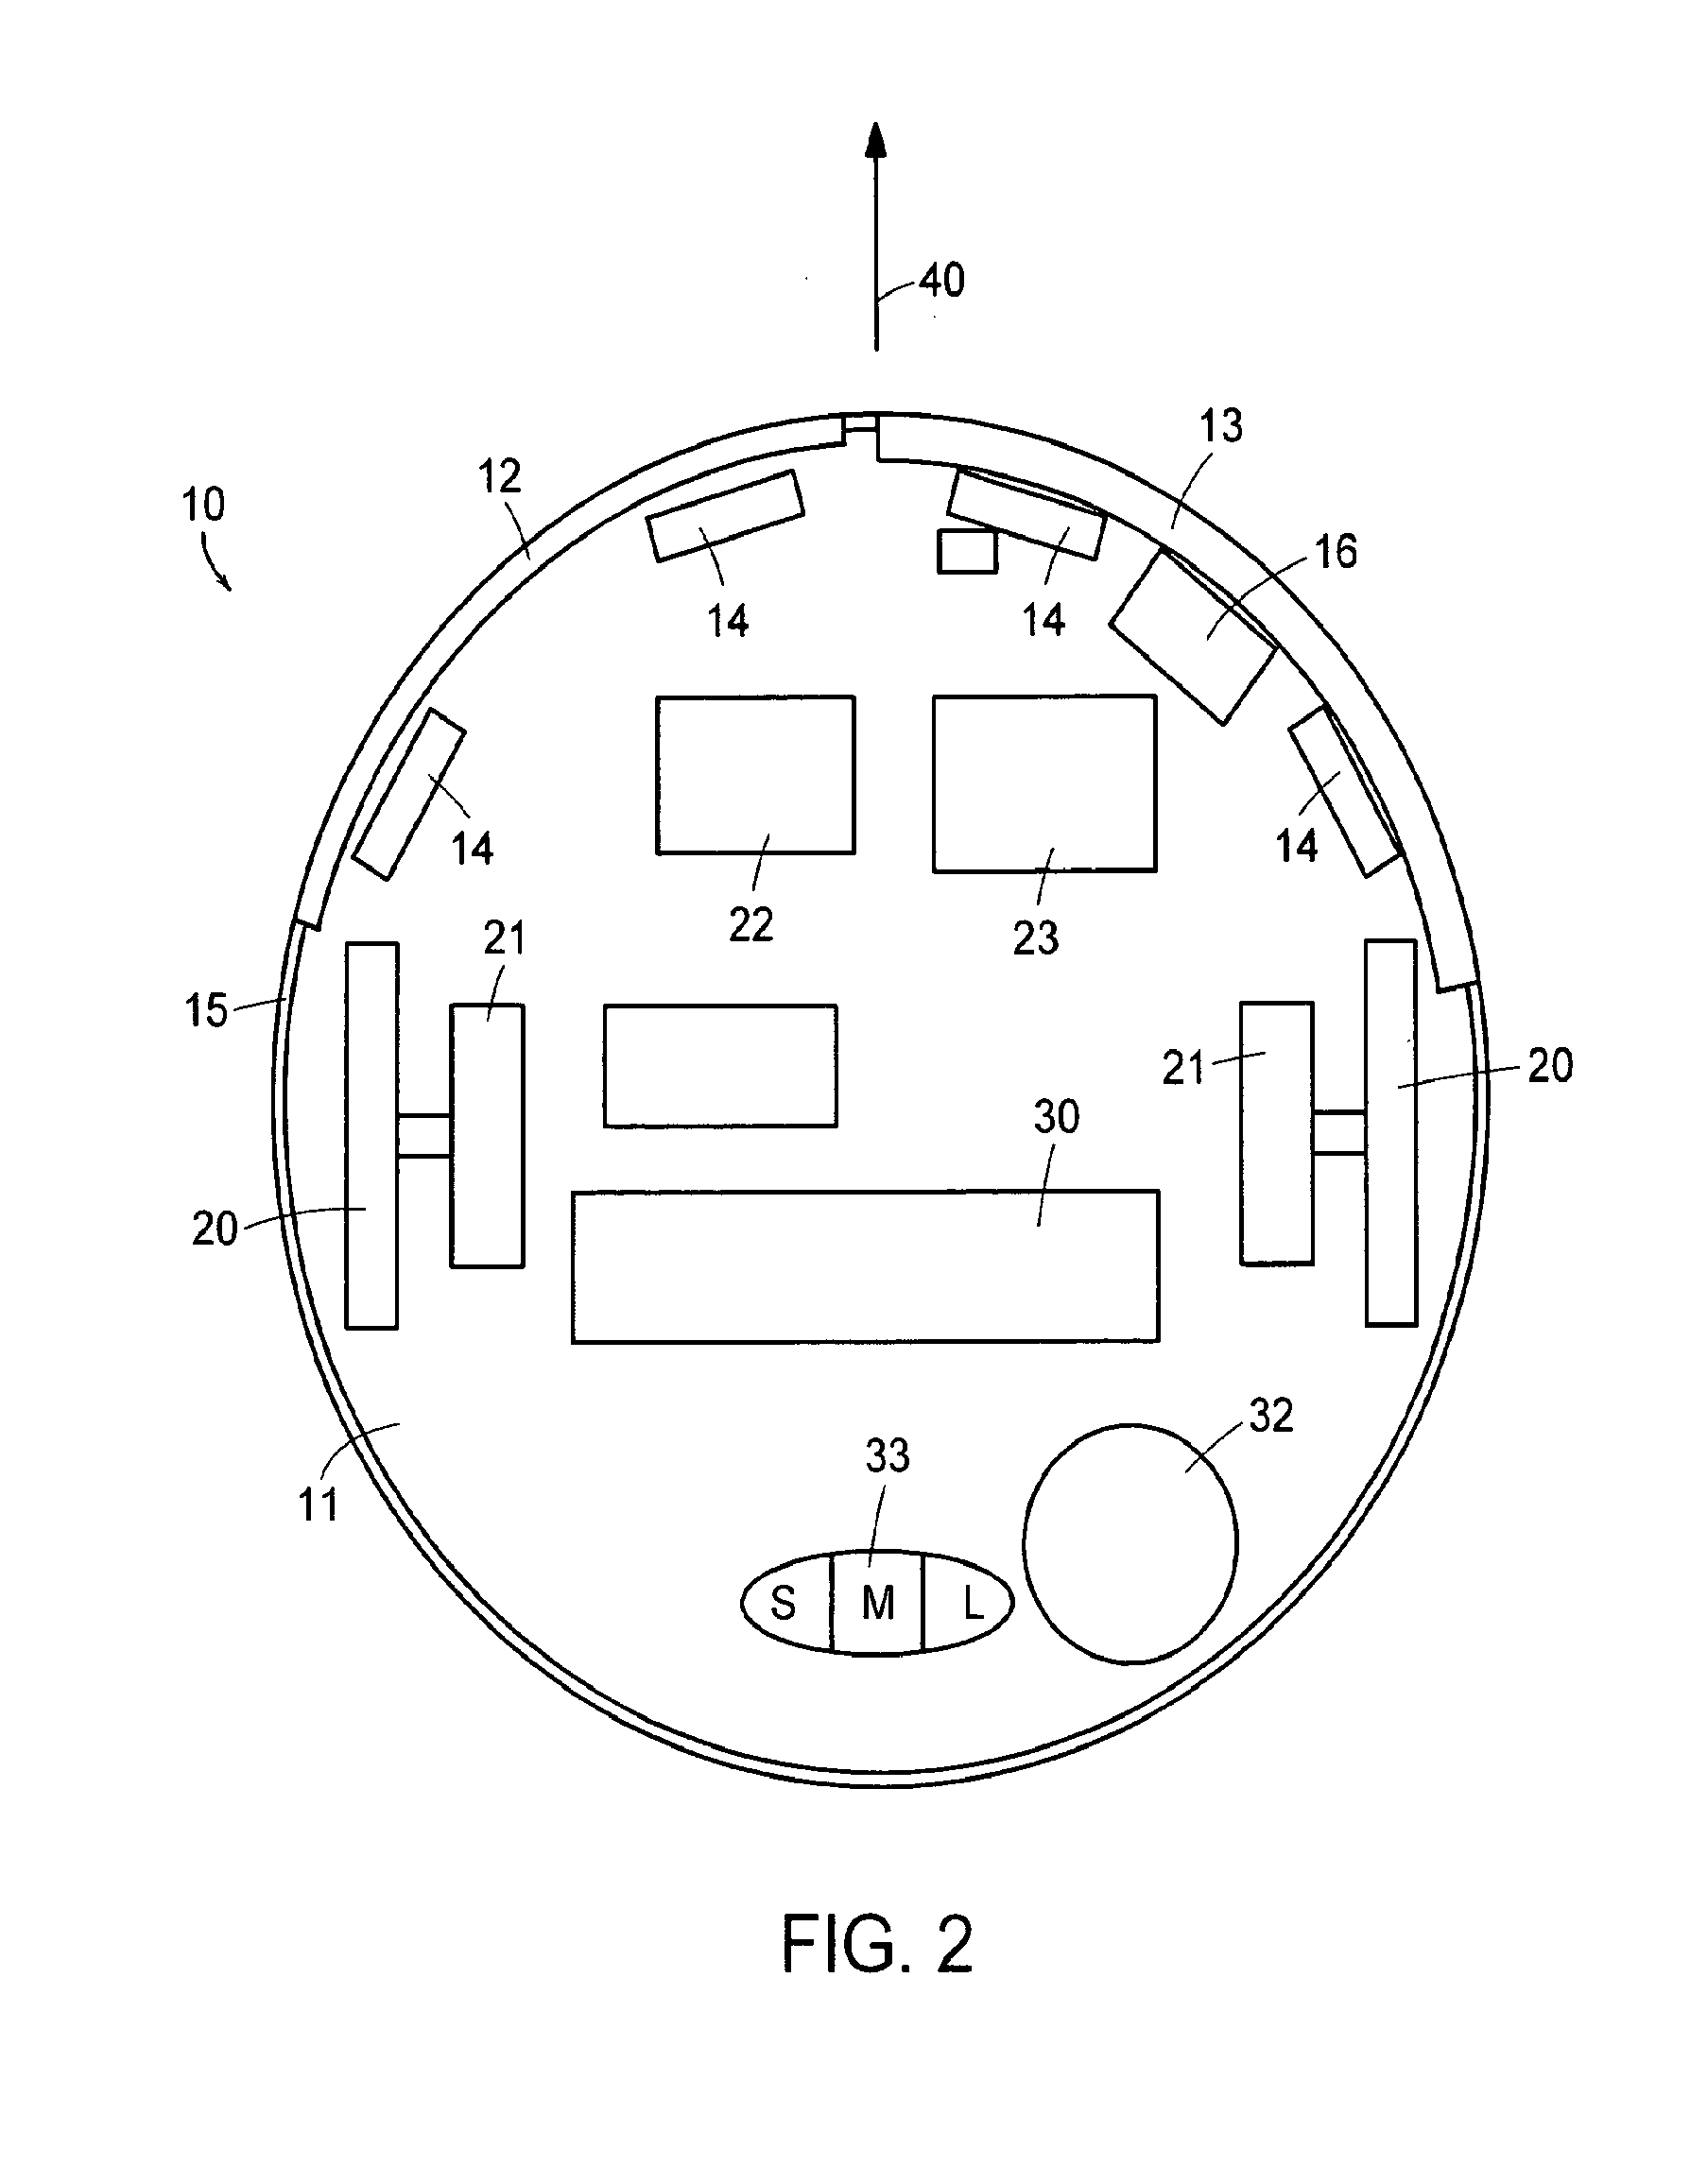 Method and System for Multi-Mode Coverage for an Autonomous Robot